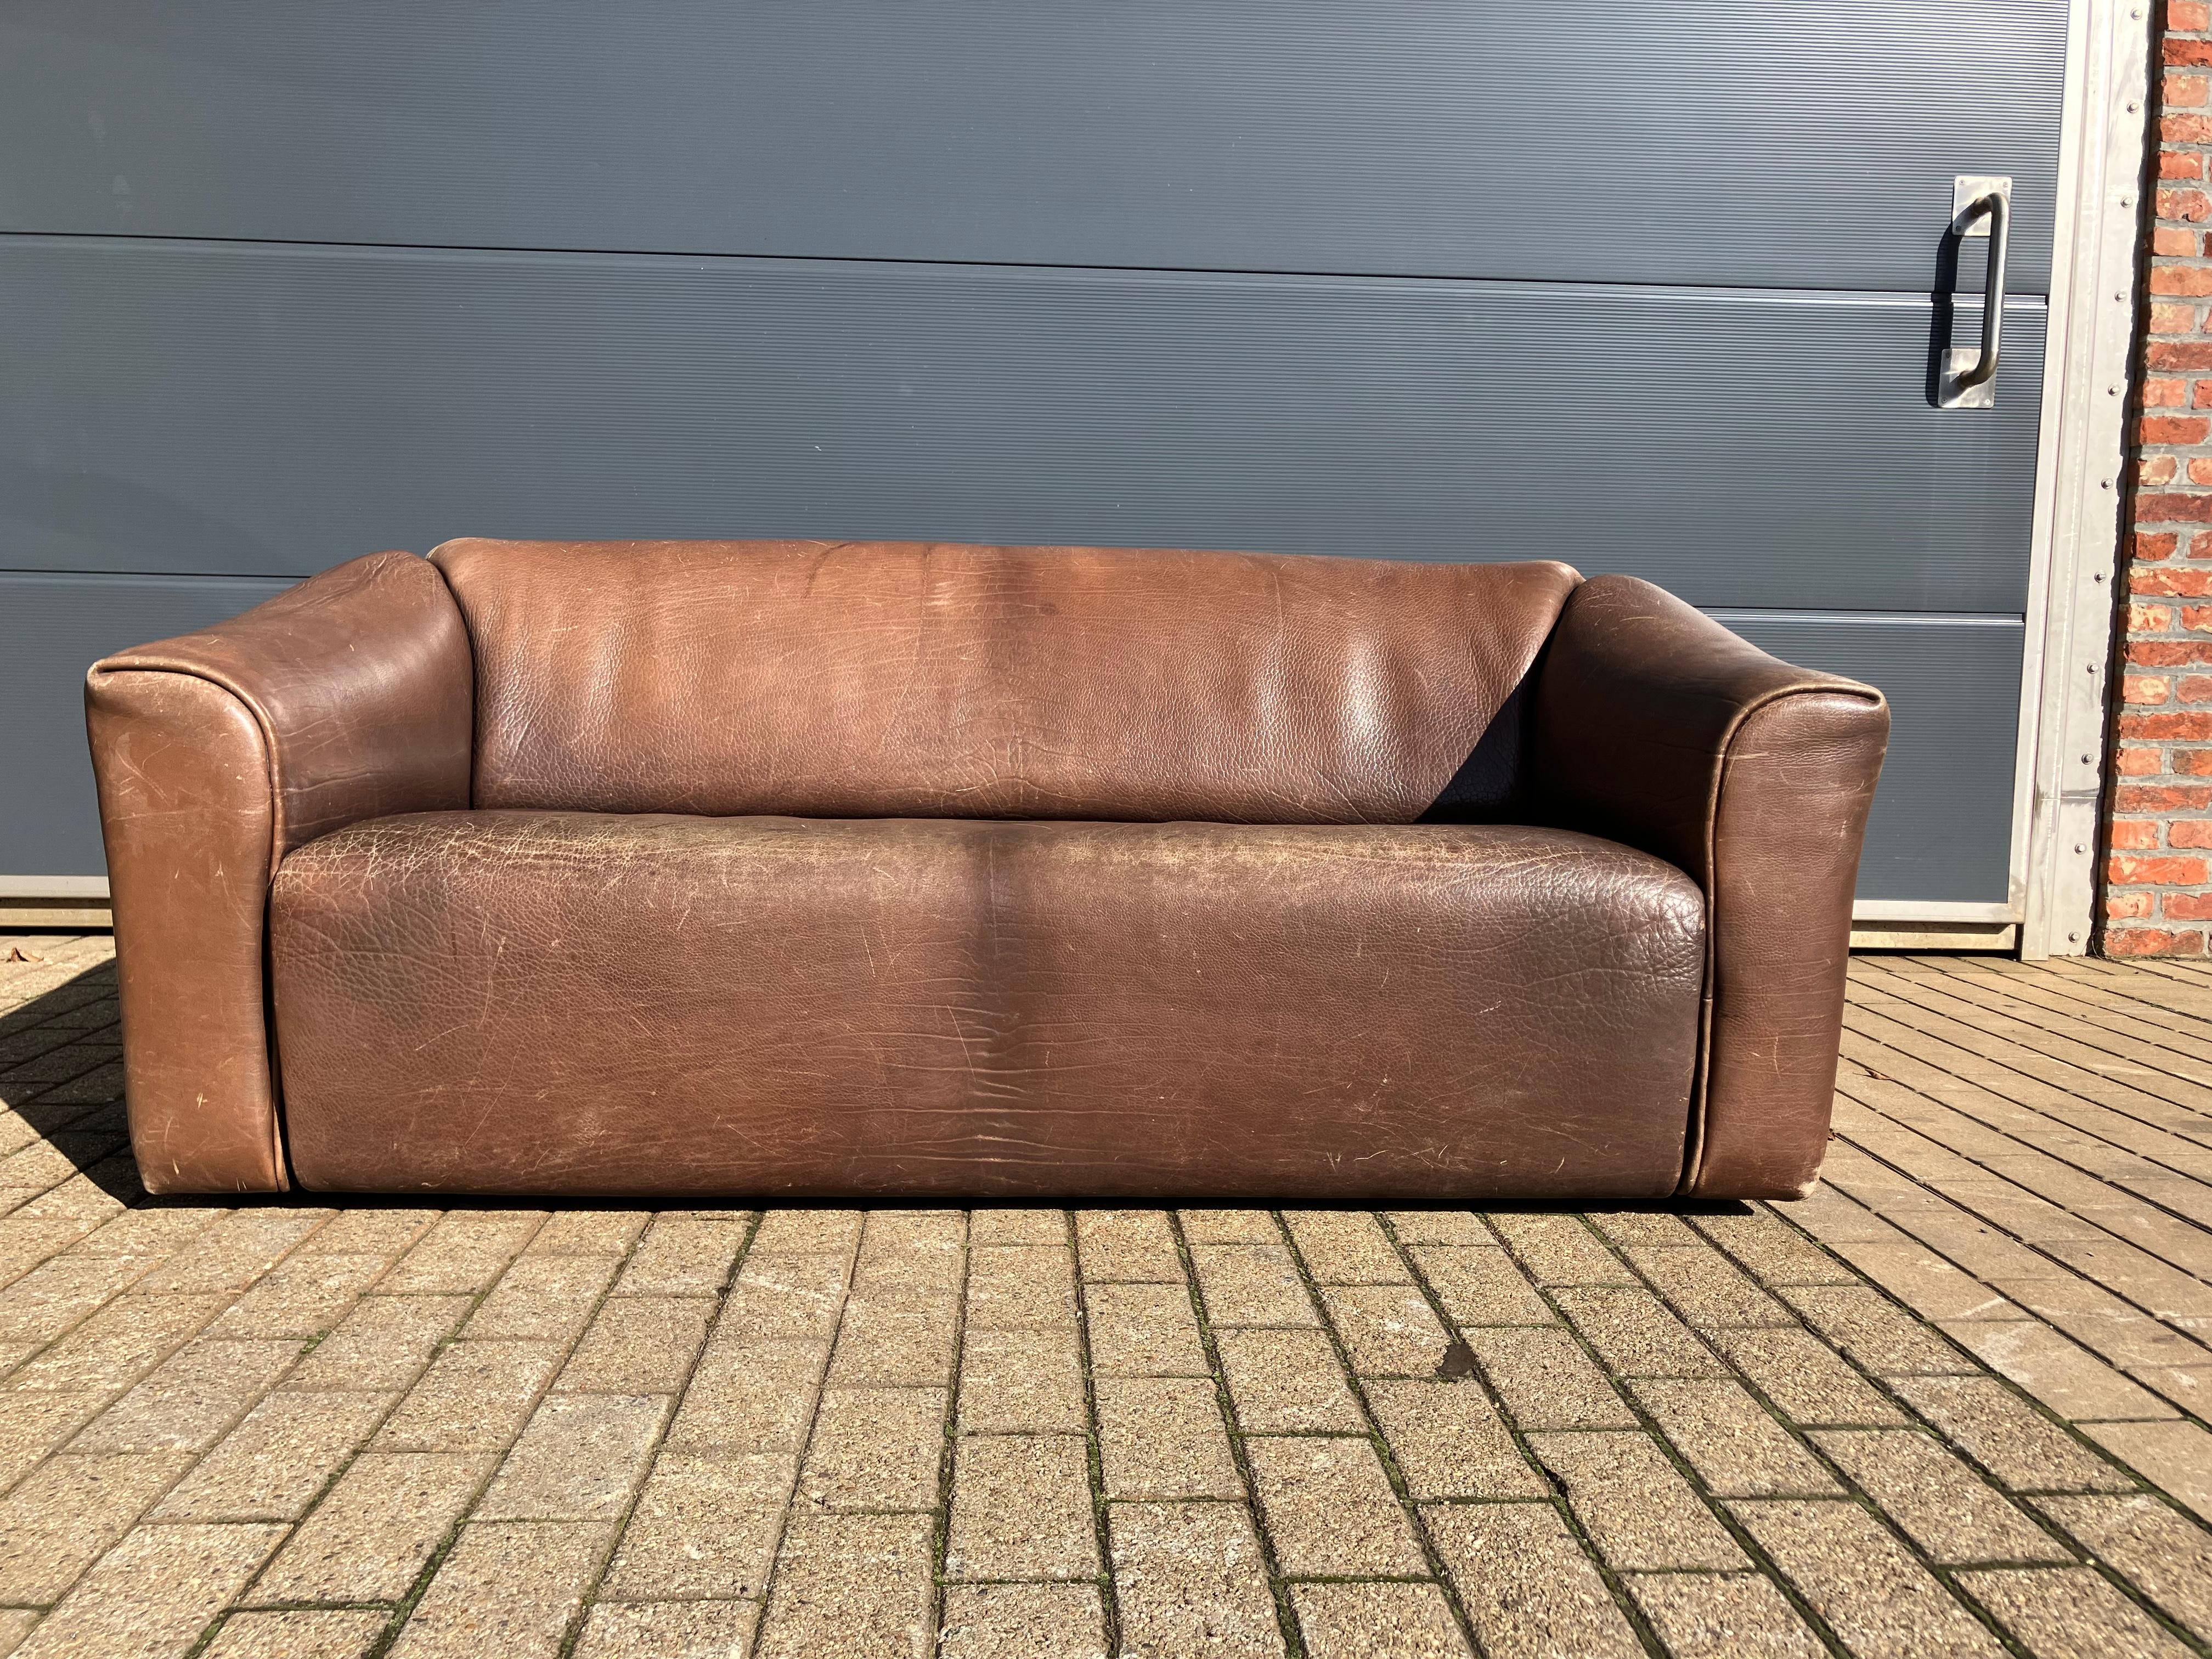 Design classic from the Swiss top brand De Sede. Made of the typical indestructible 5mm thick NECK leather (Nappa natural leather). Top quality!

Colour: dark brown

The seat is in good vintage condition with the typical patina that comes with this